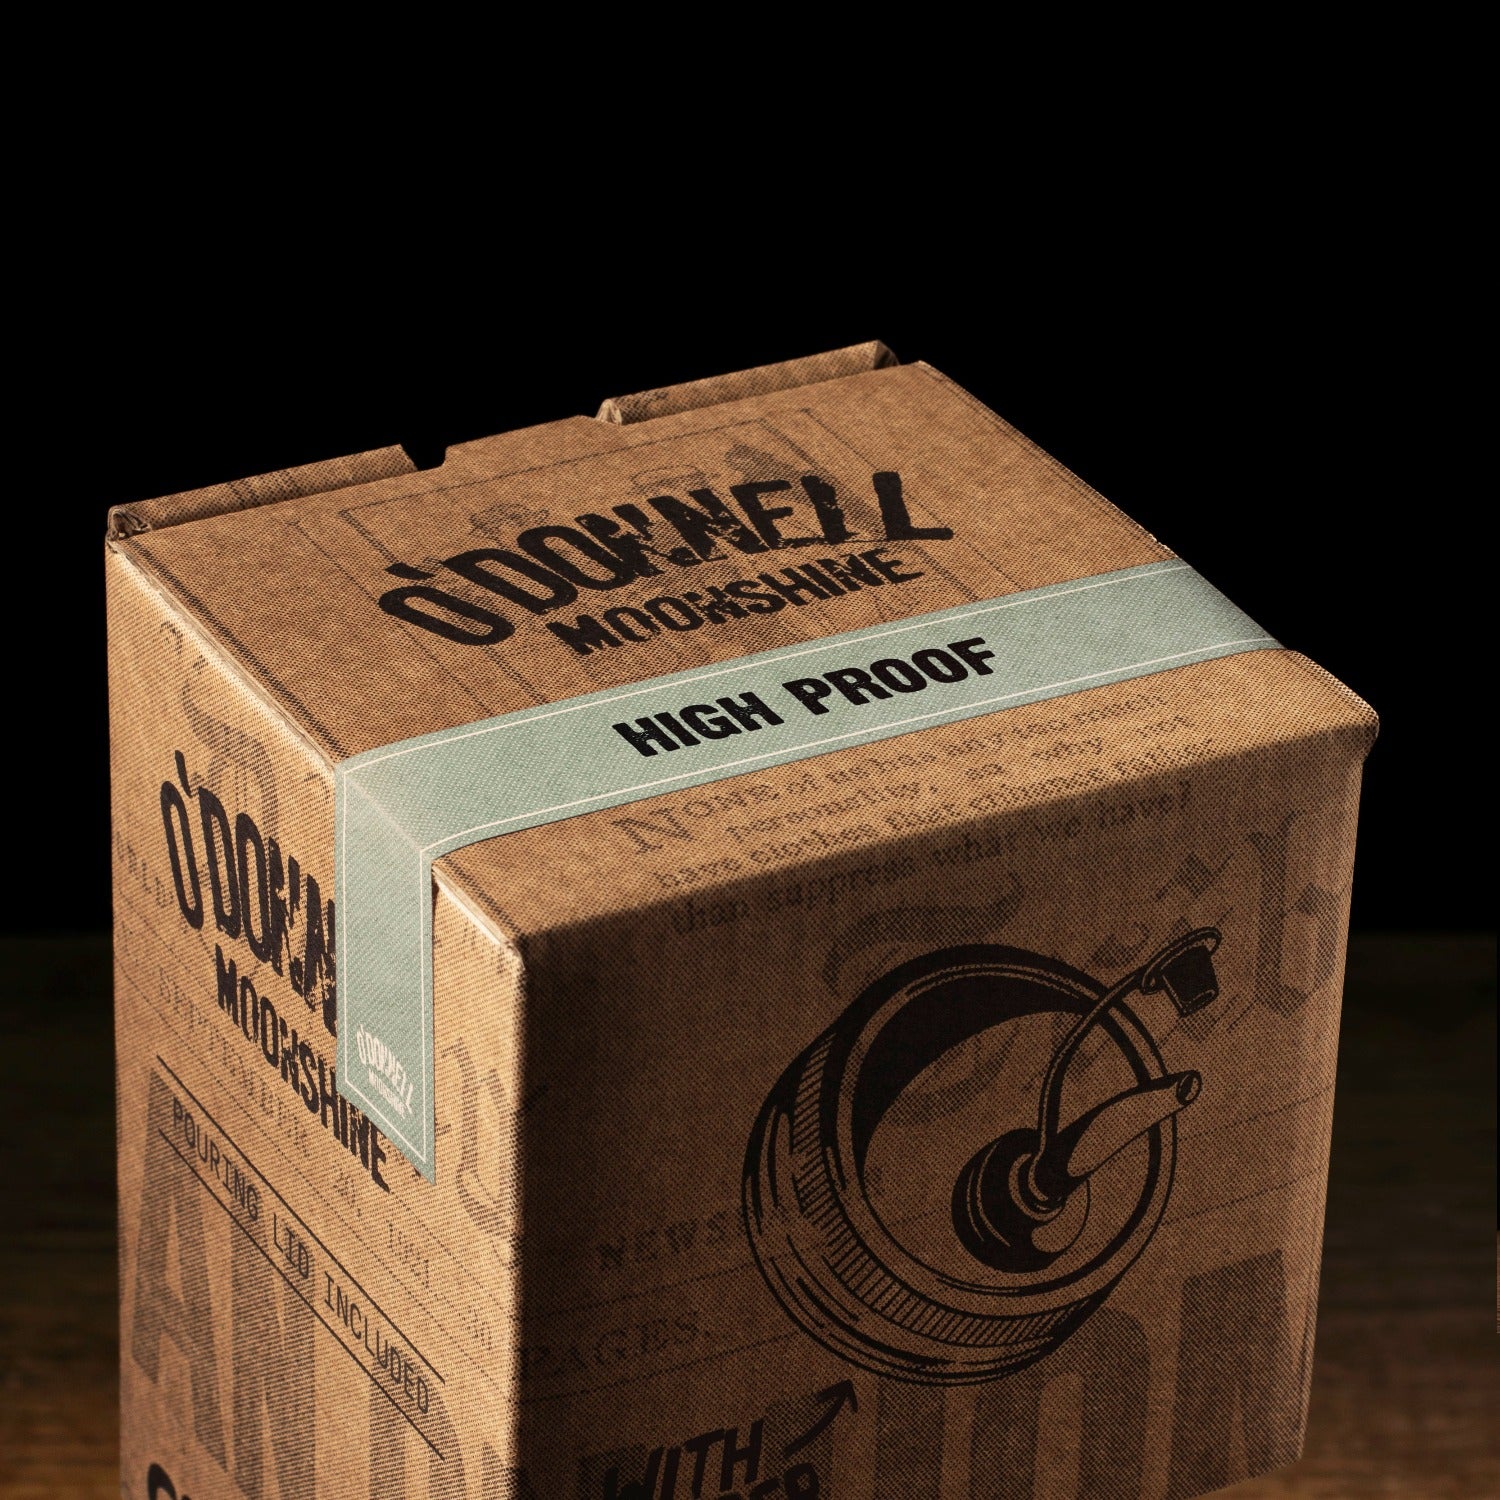 O Donnell Moonshine High Proof giftset with pouring lid included shot from above